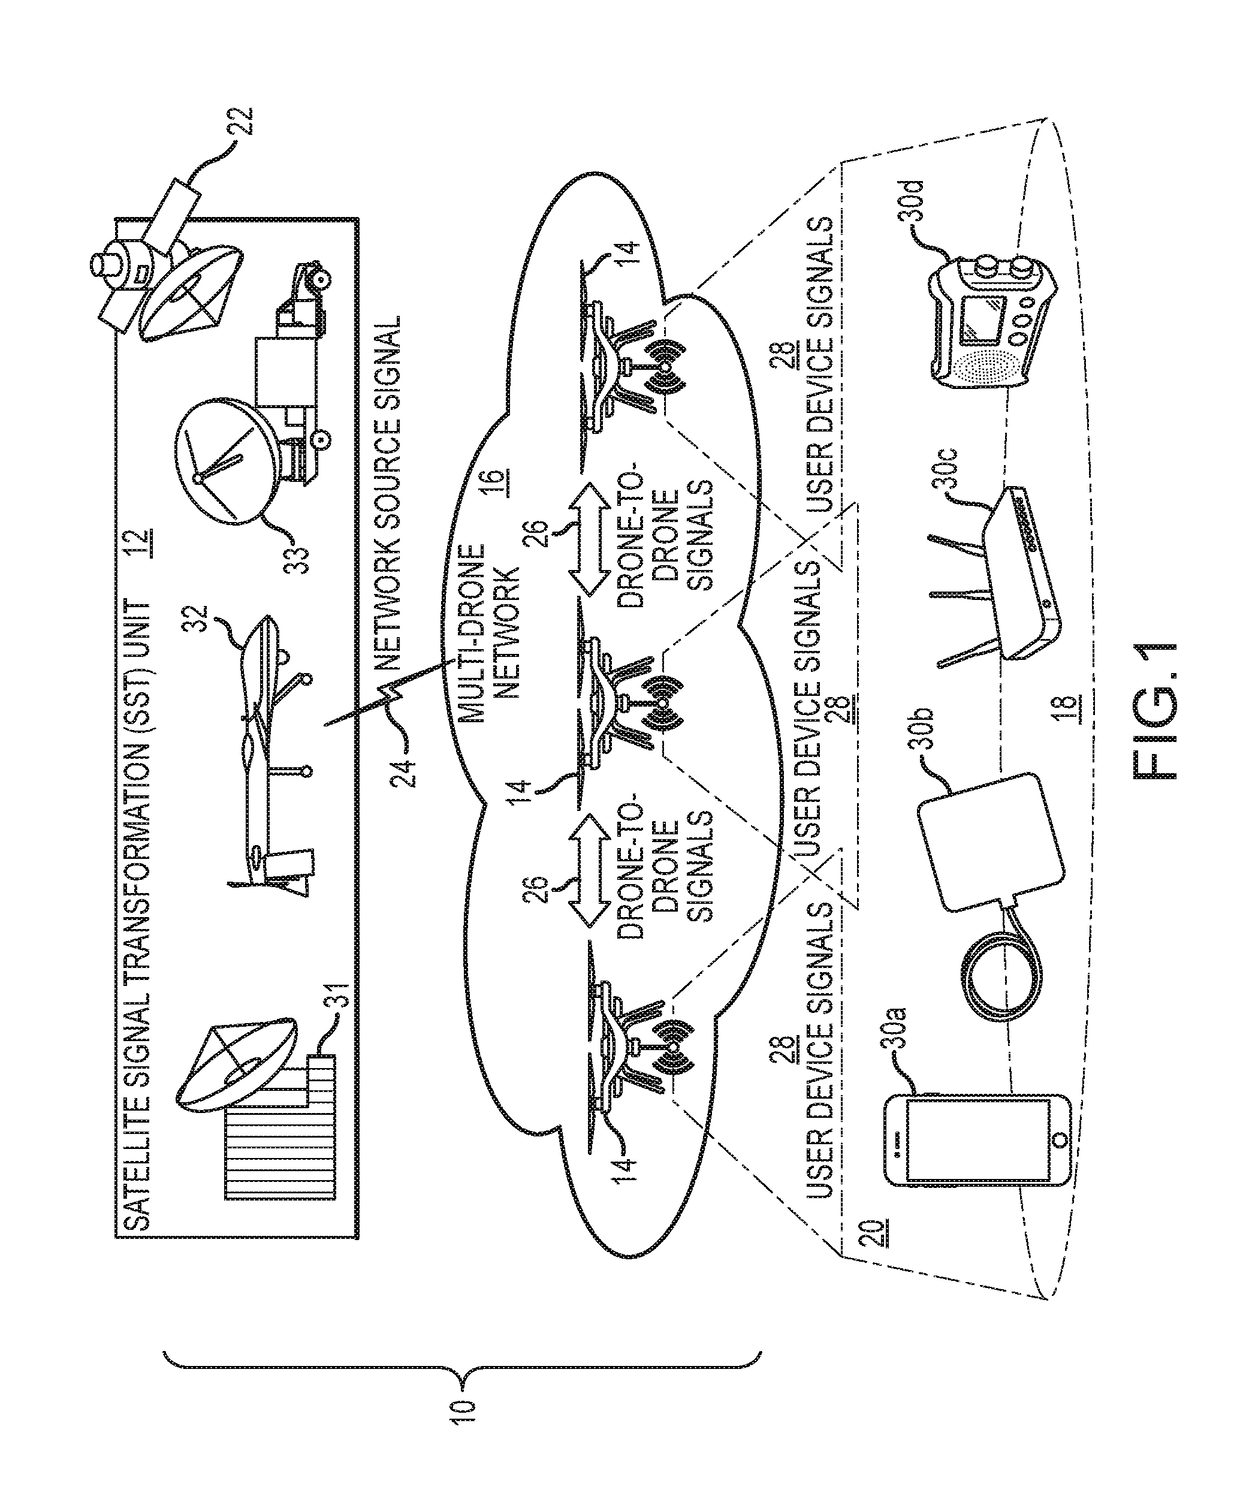 Rapidly-deployable, drone-based wireless communications systems and methods for the operation thereof